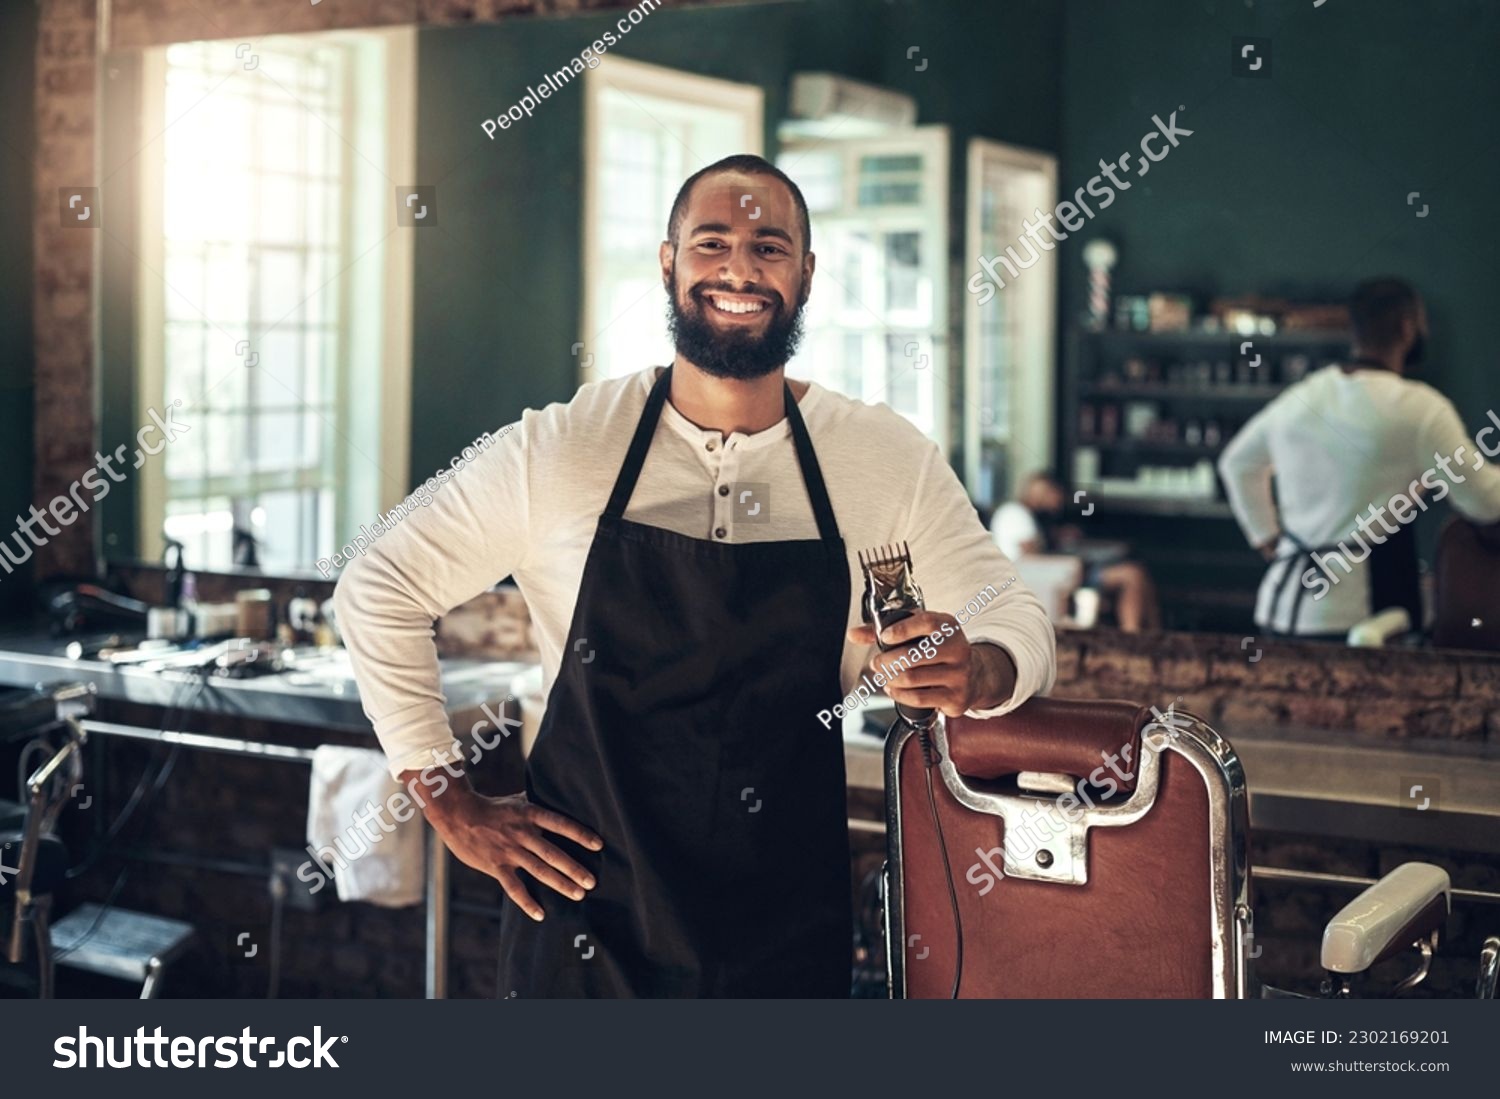 Barber shop, hair clipper and black man portrait of an entrepreneur with a smile. Salon, professional worker and male person face with happiness and proud from small business and beauty parlor #2302169201